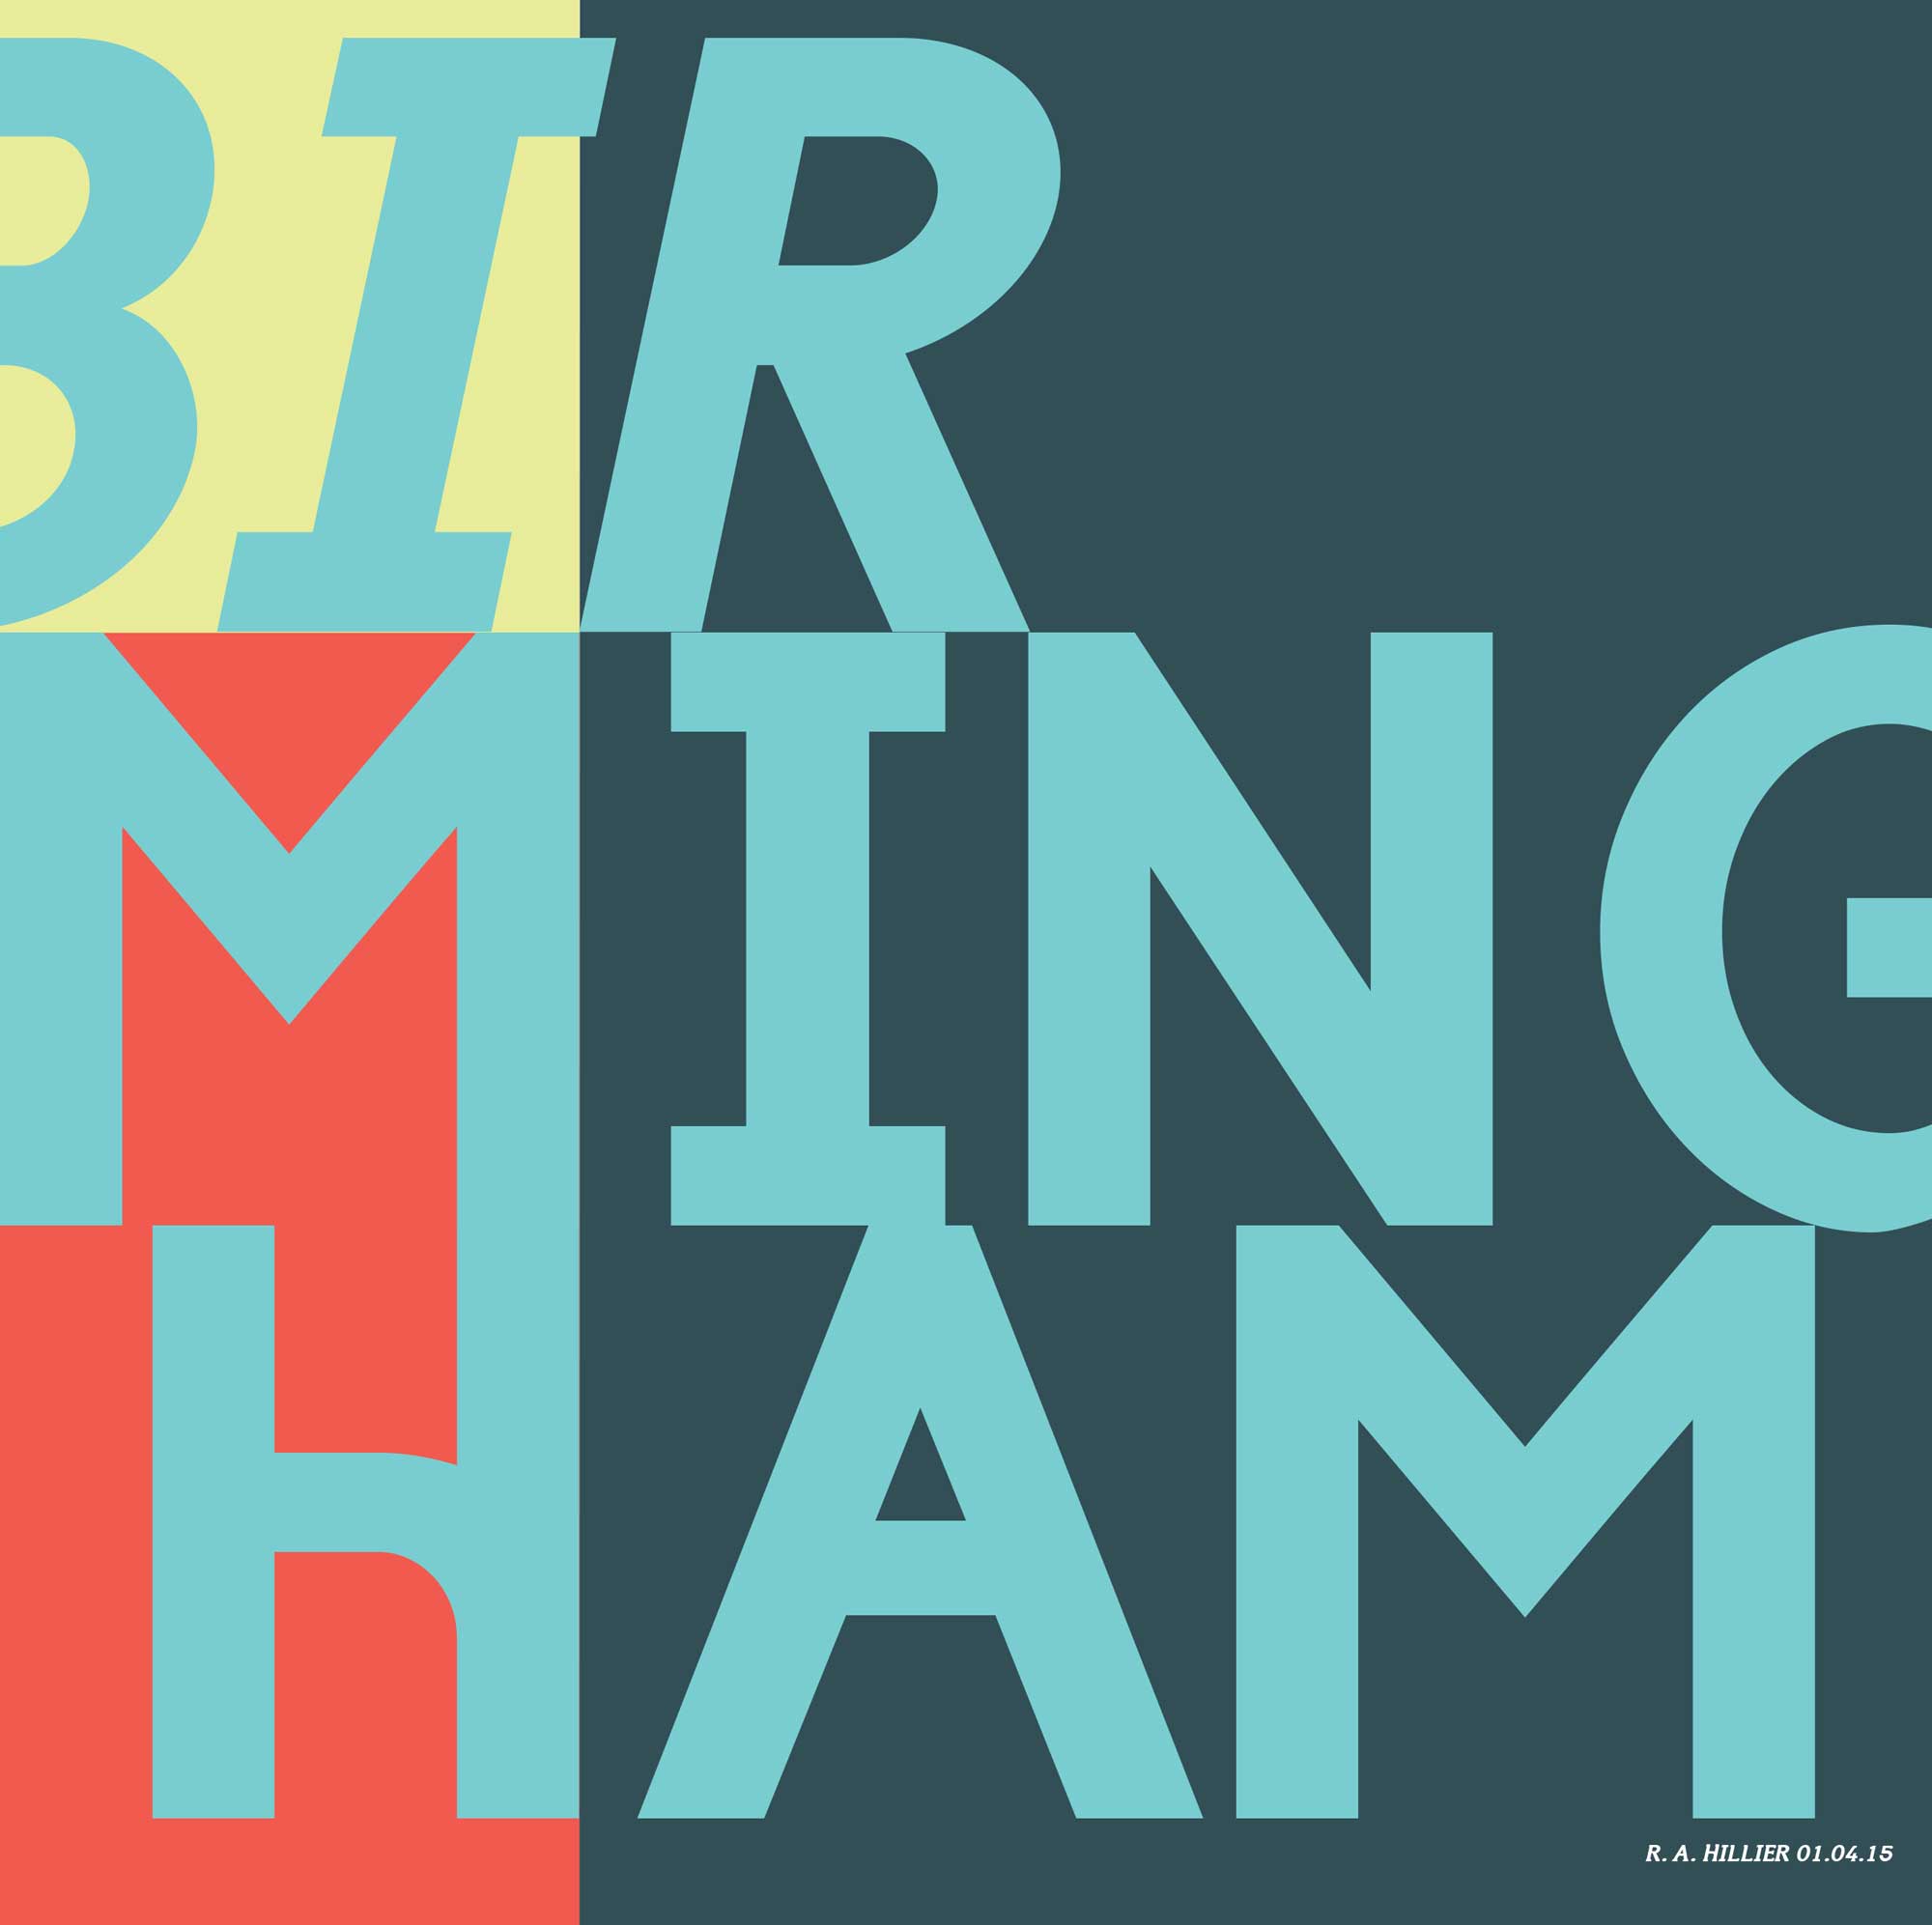 A colourful, square and rectangle grided background design, with the words ‘Birmingham’ in large italic capital letters split vertically